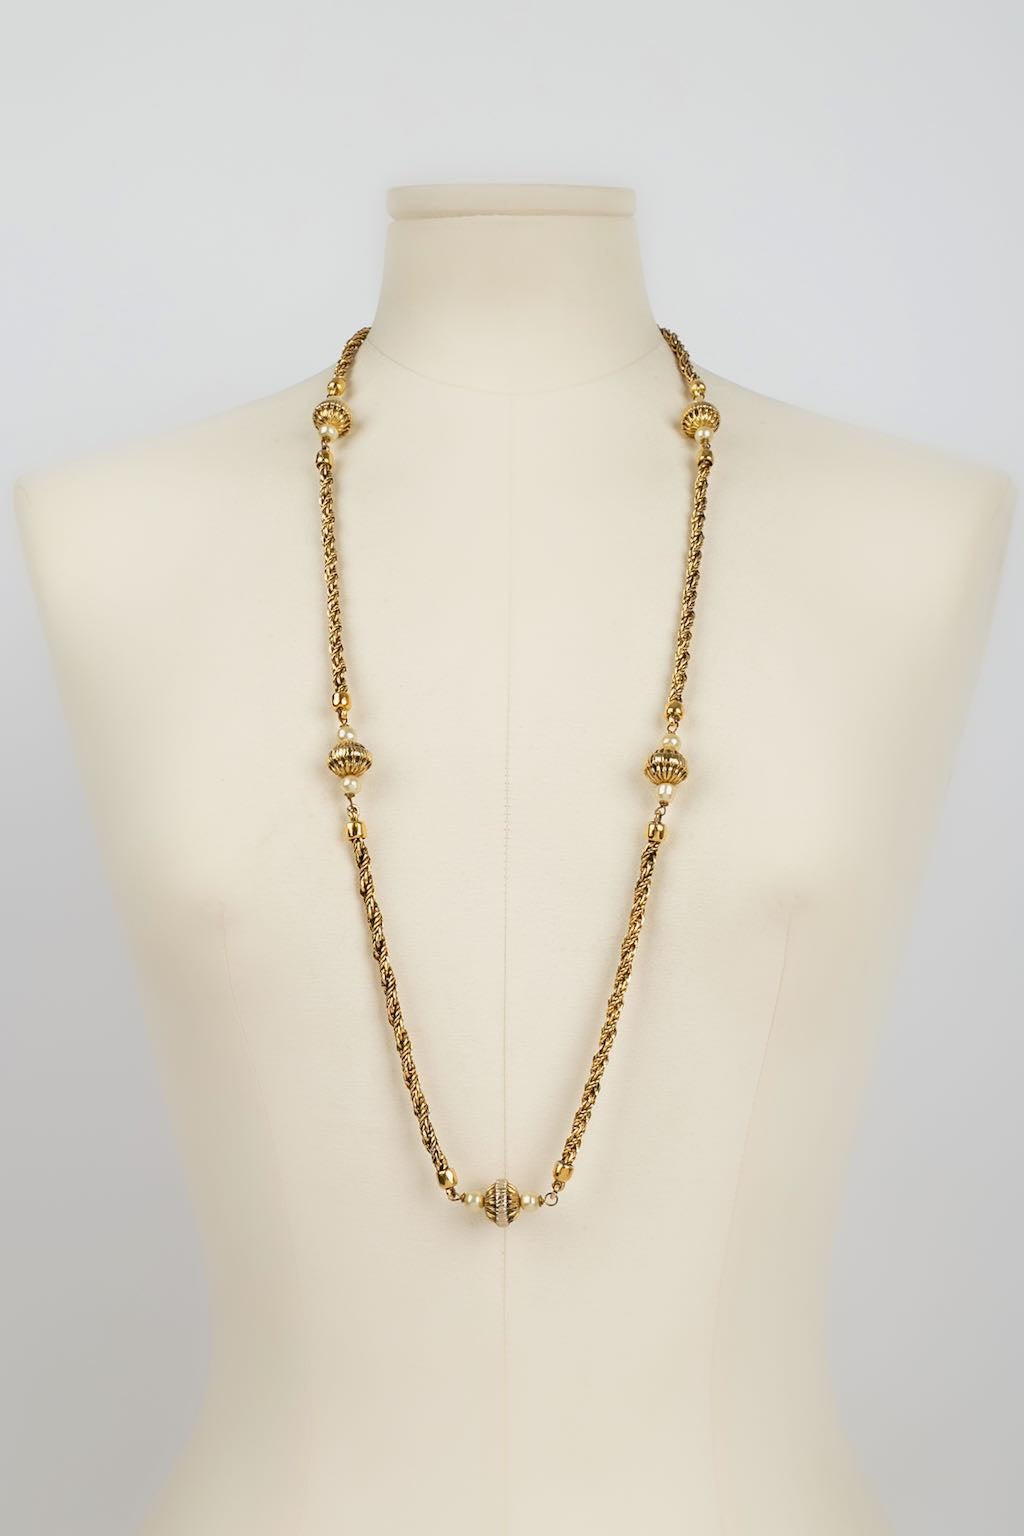 Chanel -(Made in France) Long necklace in gilded metal decorated with pearly pearls. Collection 1984.

Additional information: 
Dimensions: Length : 84 cm
Condition: Very good condition
Seller Ref number: CB28